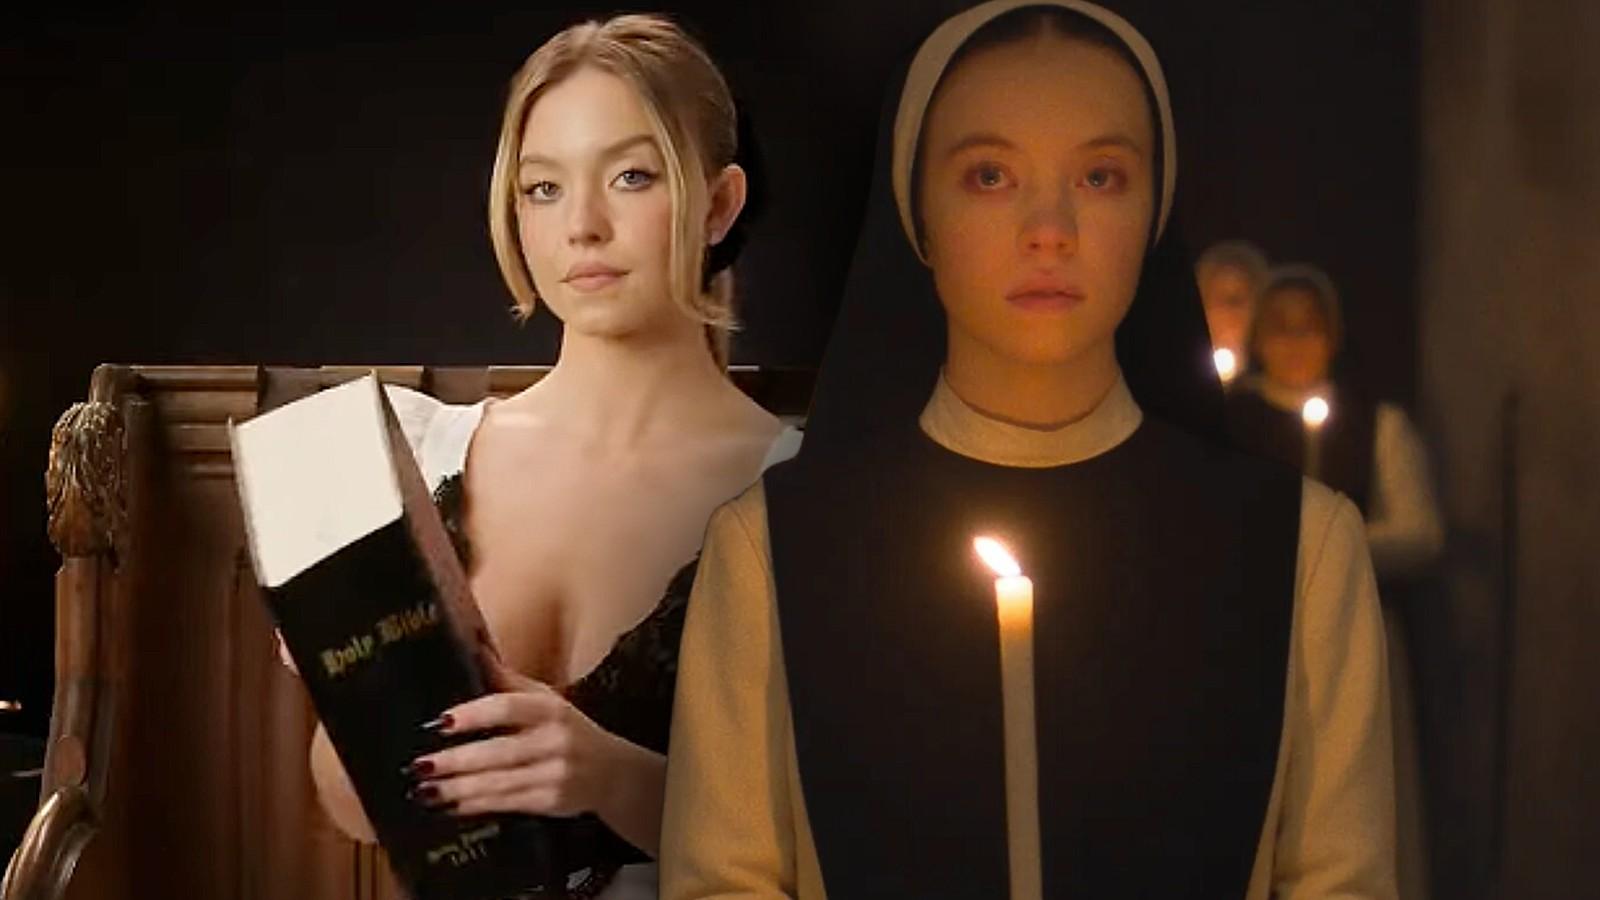 Sydney Sweeney reading the Bible and a still from Immaculate